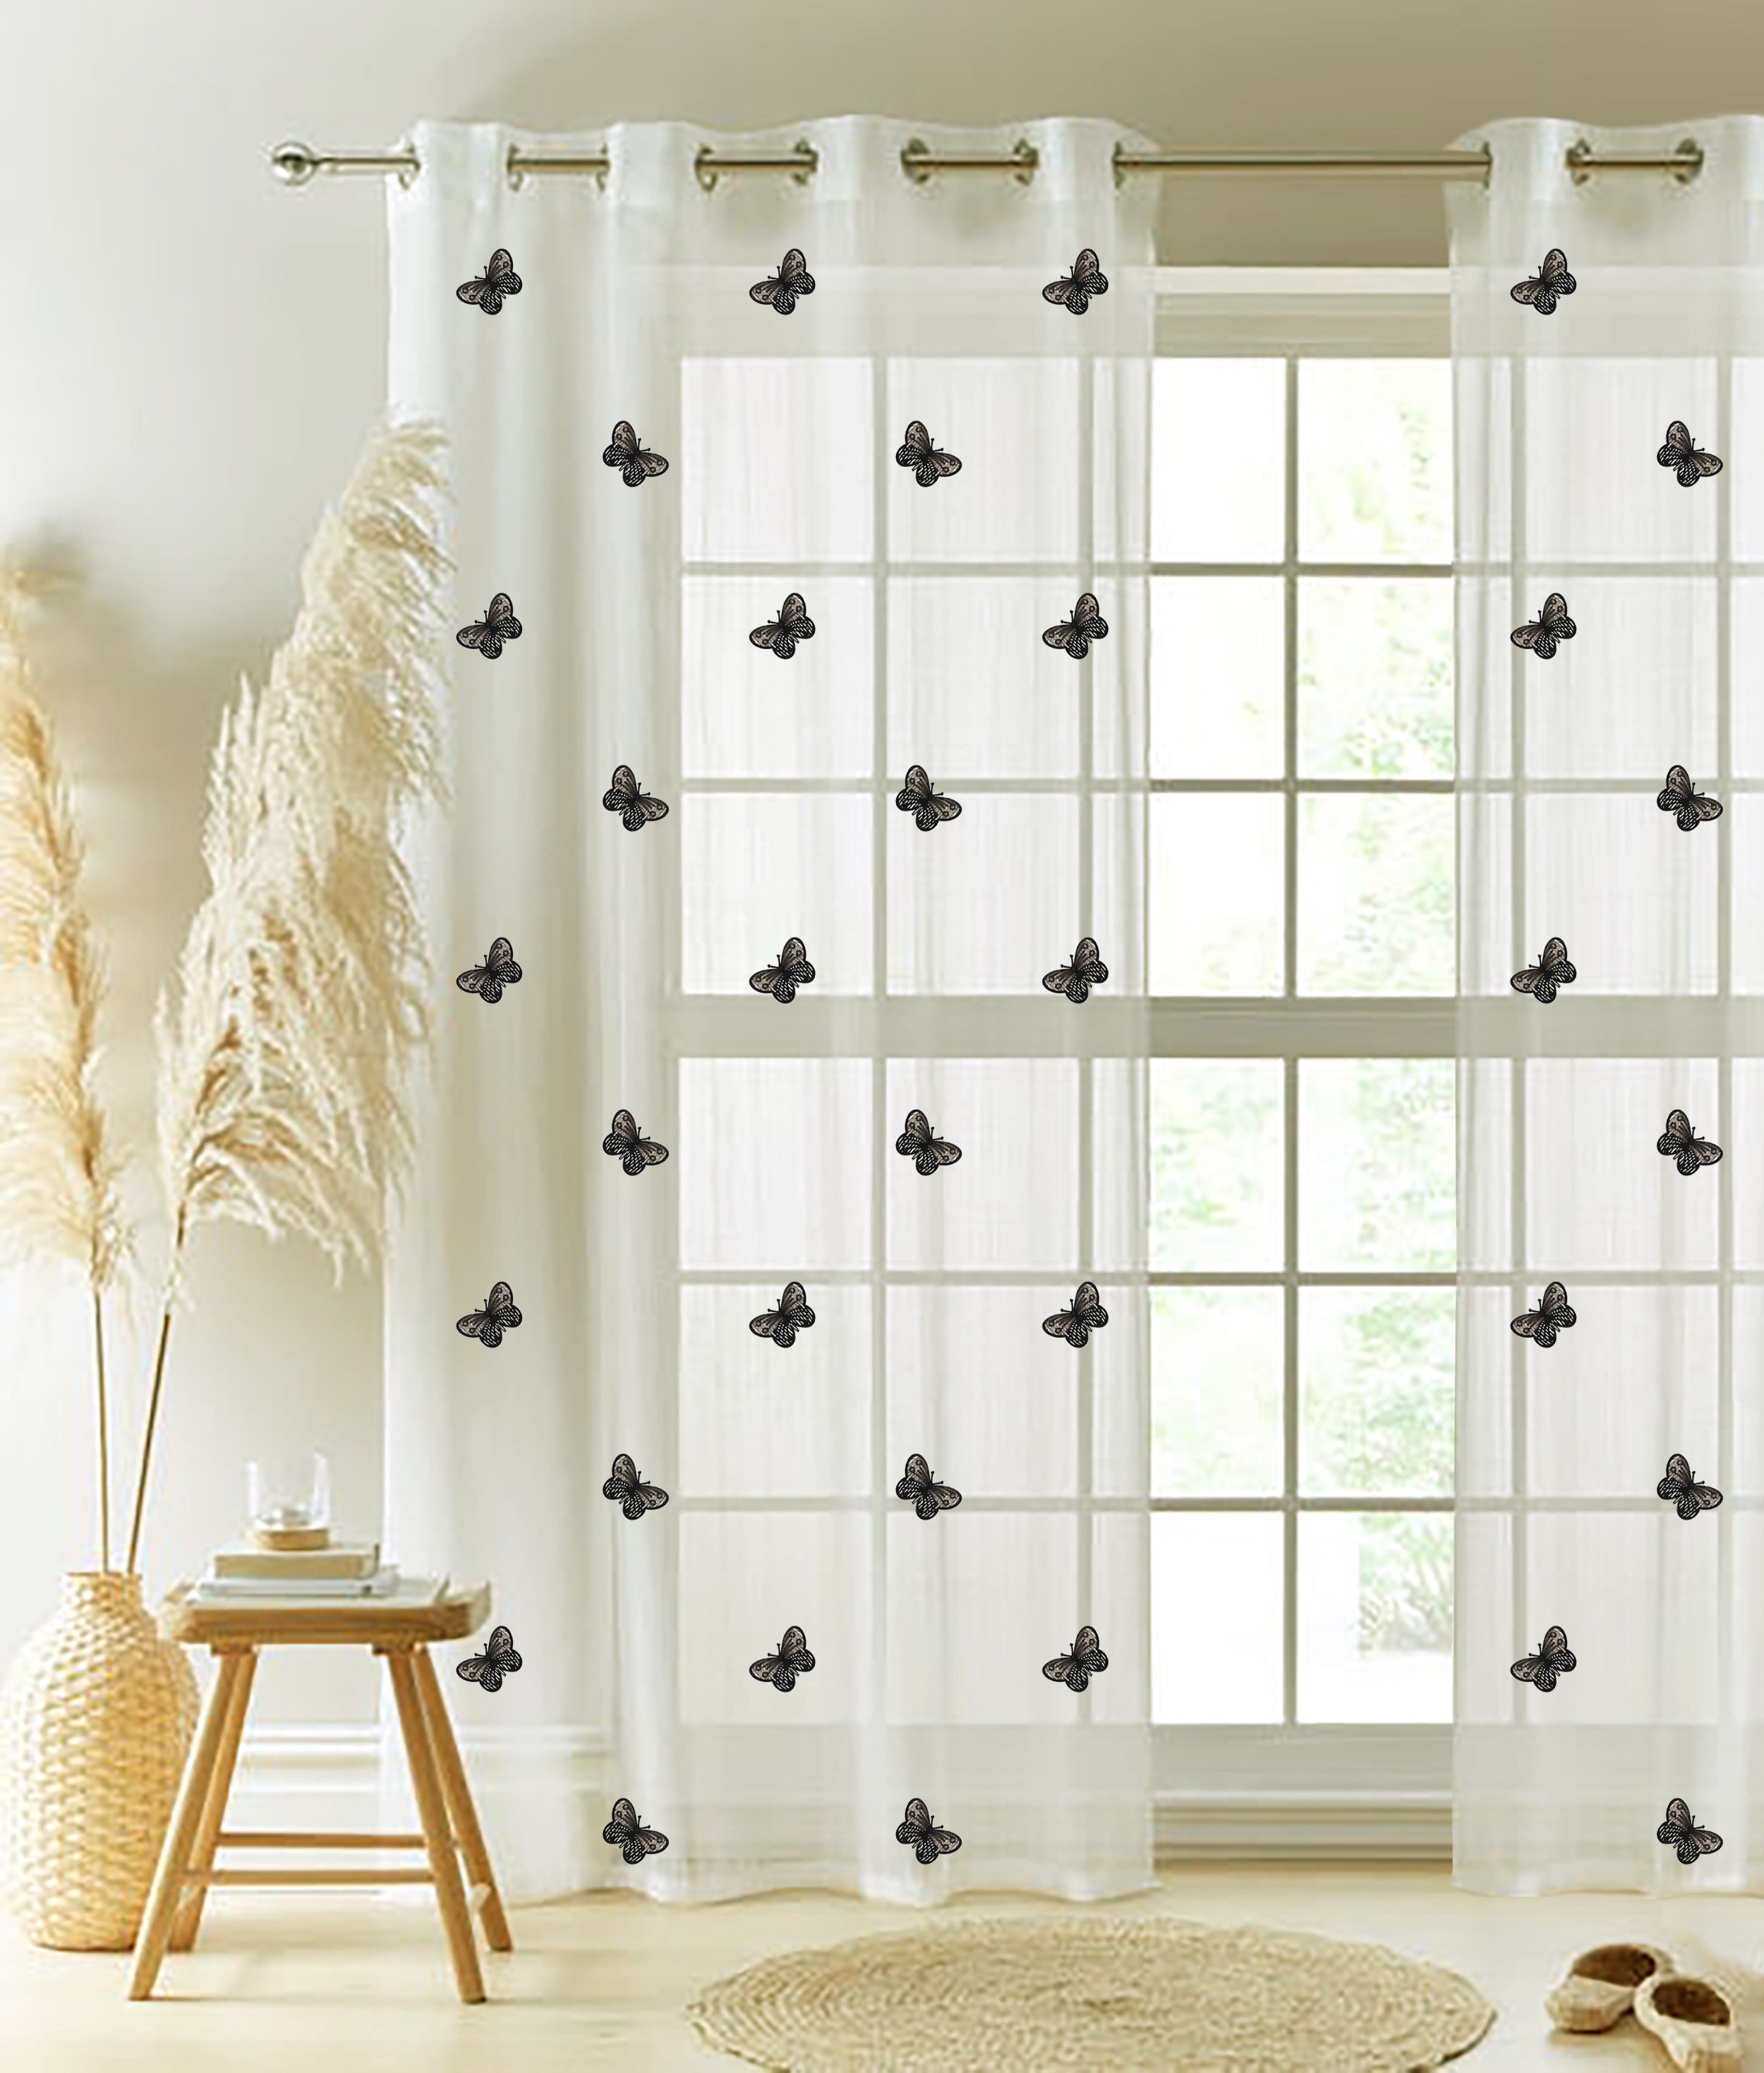 BUTTERFLY BLACK SHEER CURTAIN